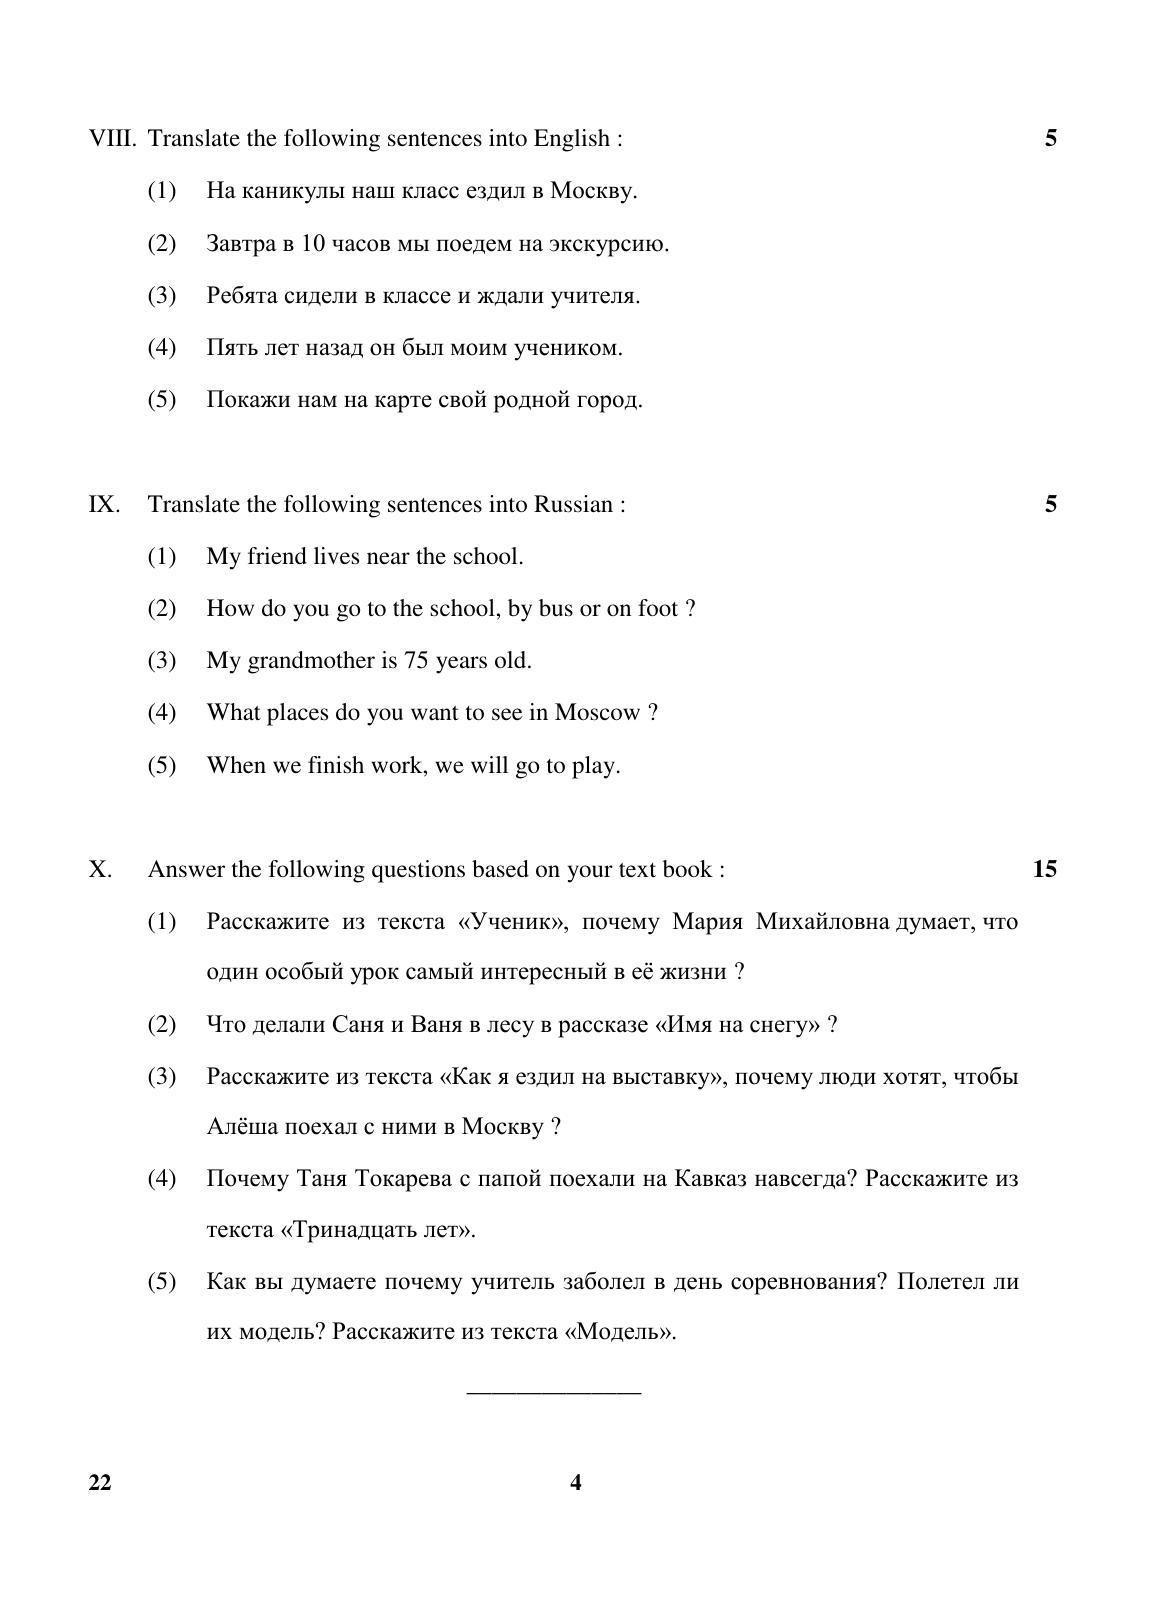 CBSE Class 10 22 (Russian) 2018 Question Paper - Page 4